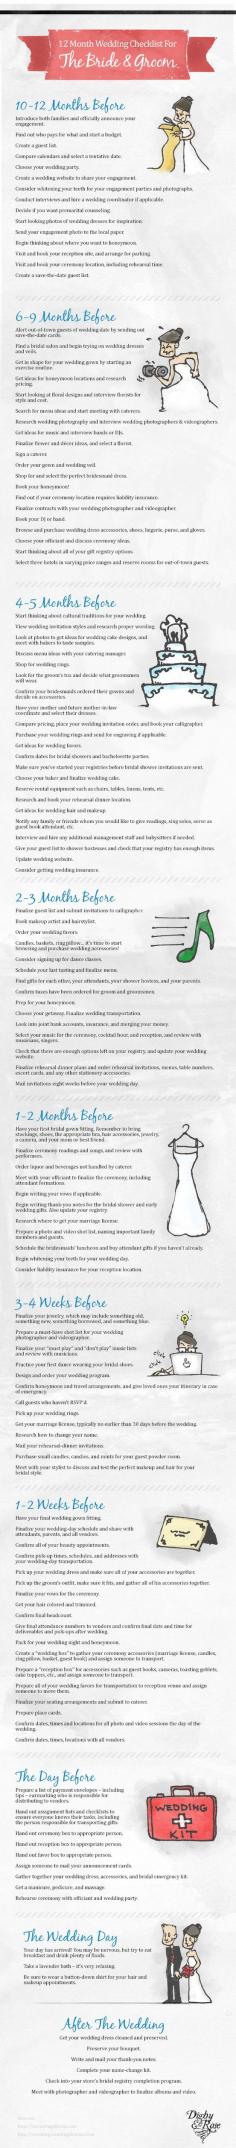 12 Month Wedding Checklist For The Bride and Groom..good thing there is a check list so can remember everything..